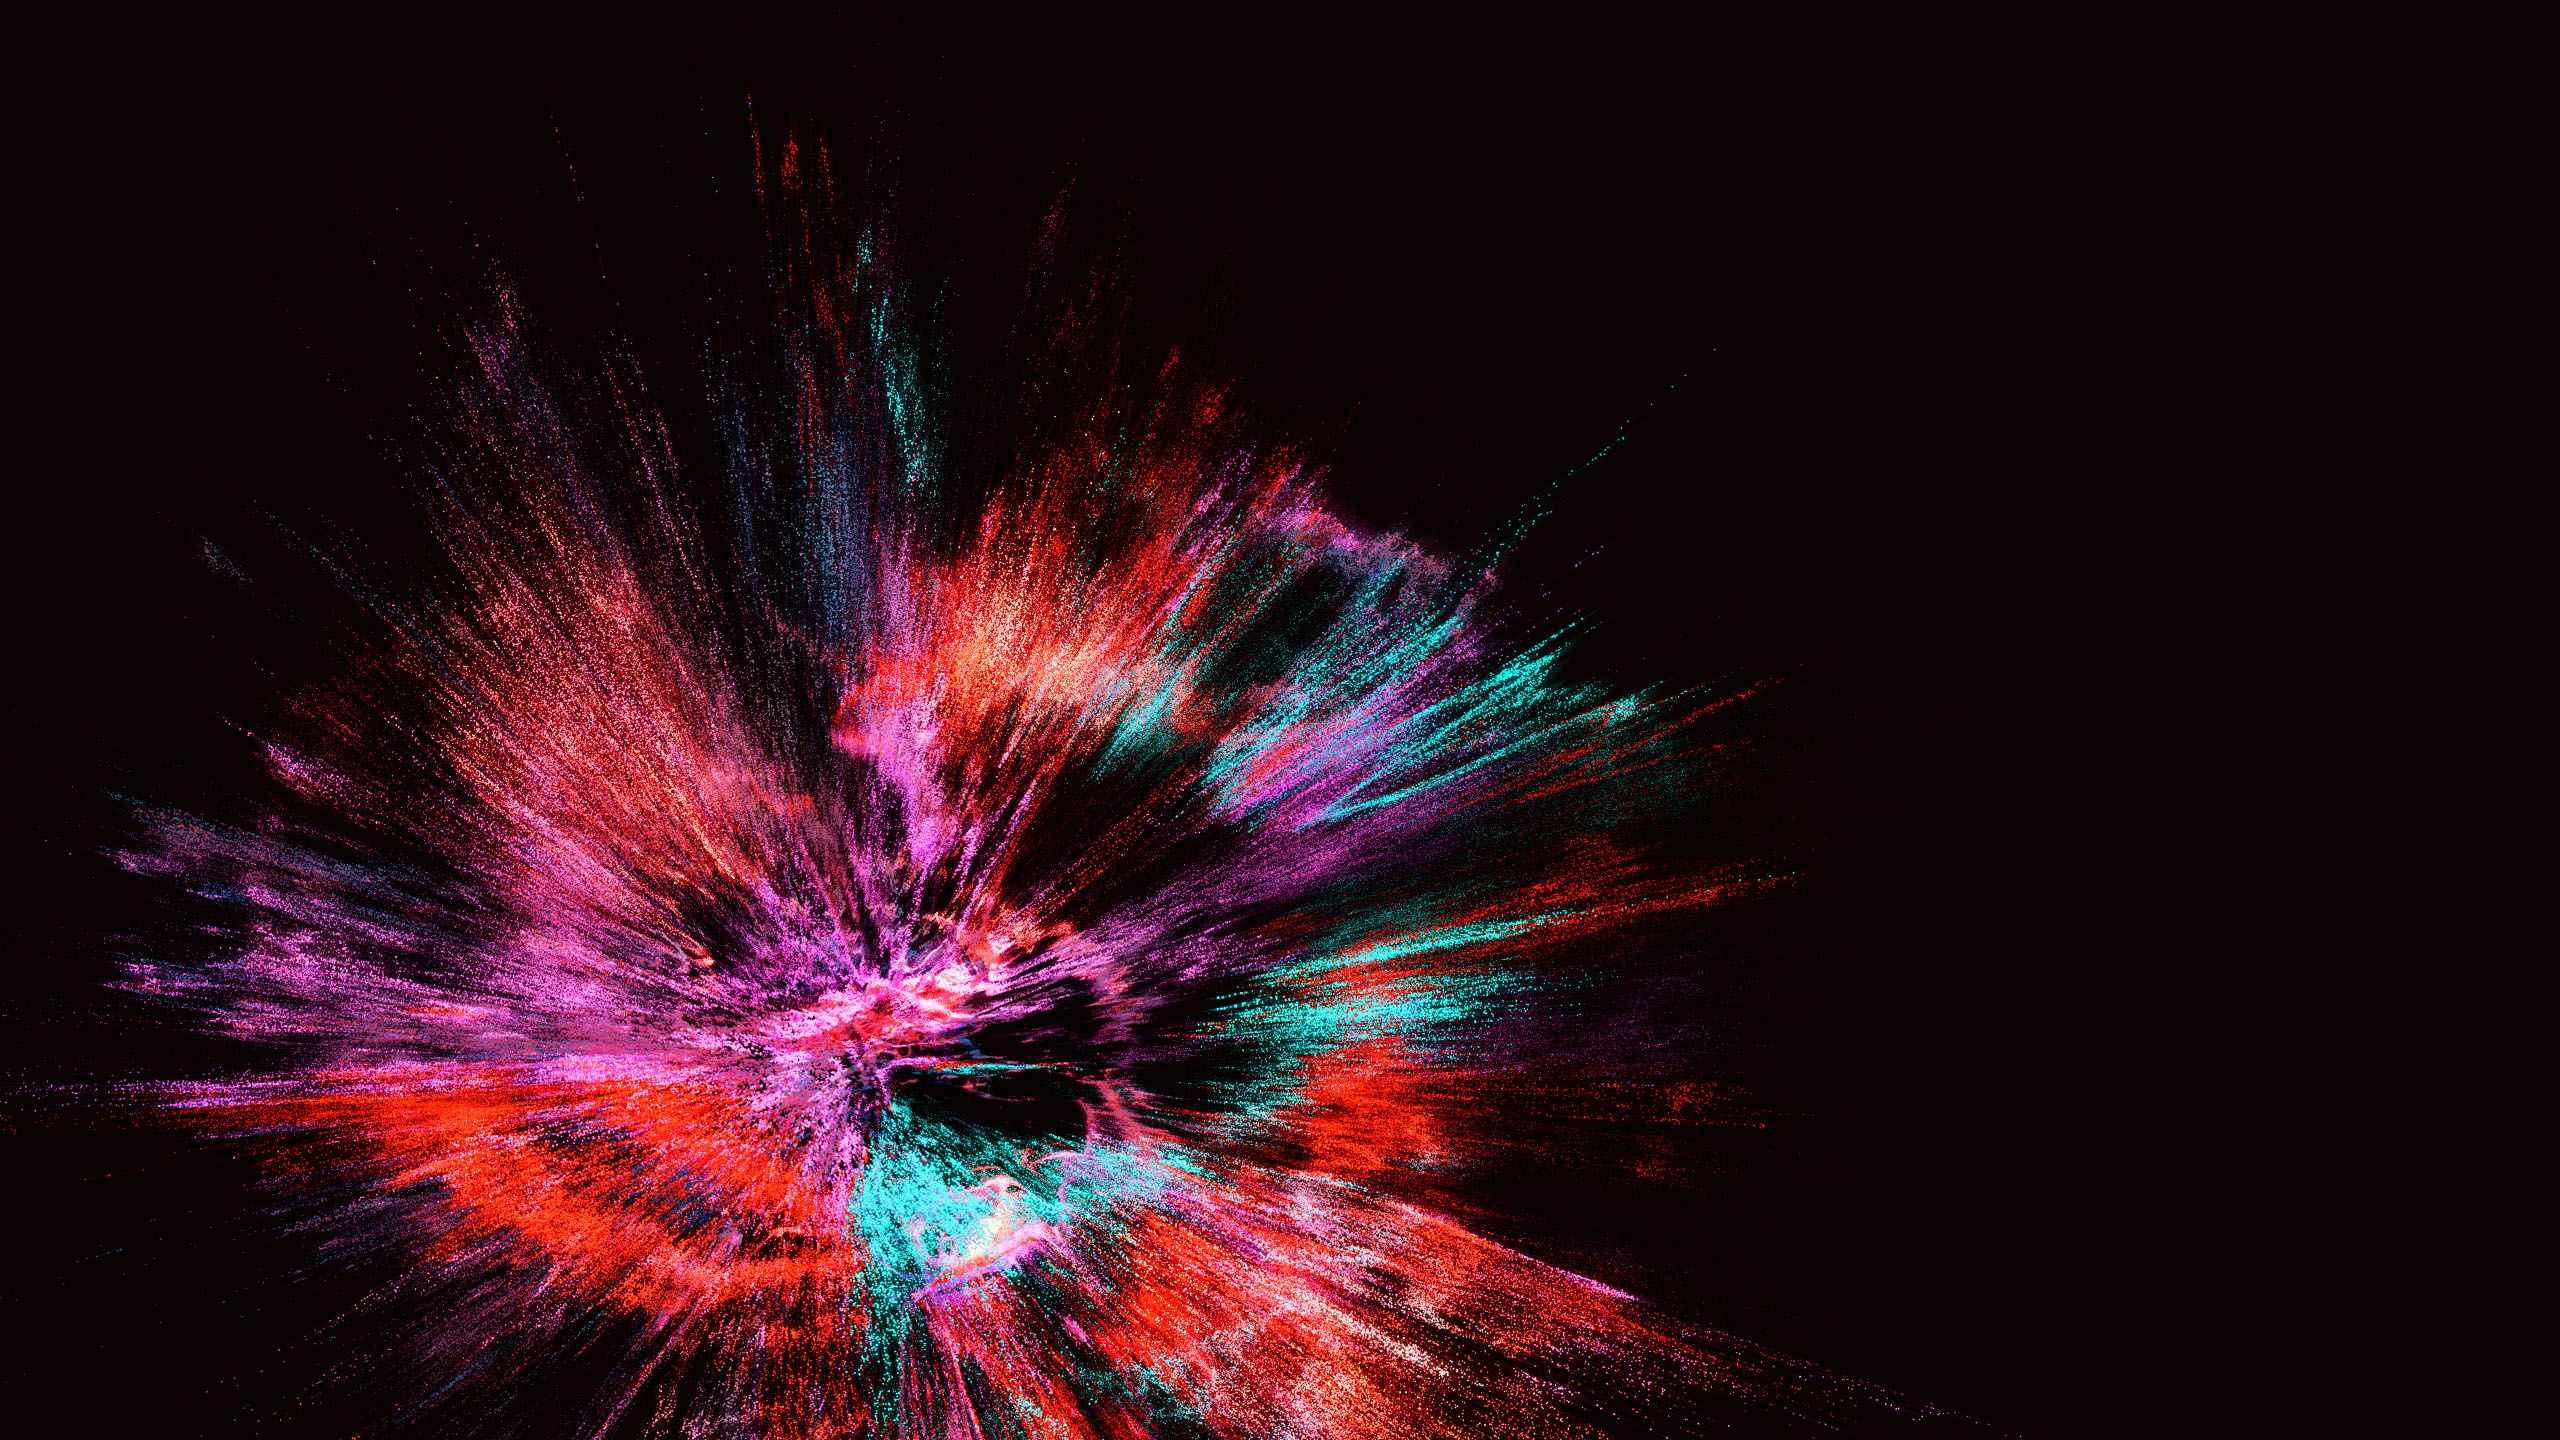 An image made up of different splashes of colour on a black backdrop